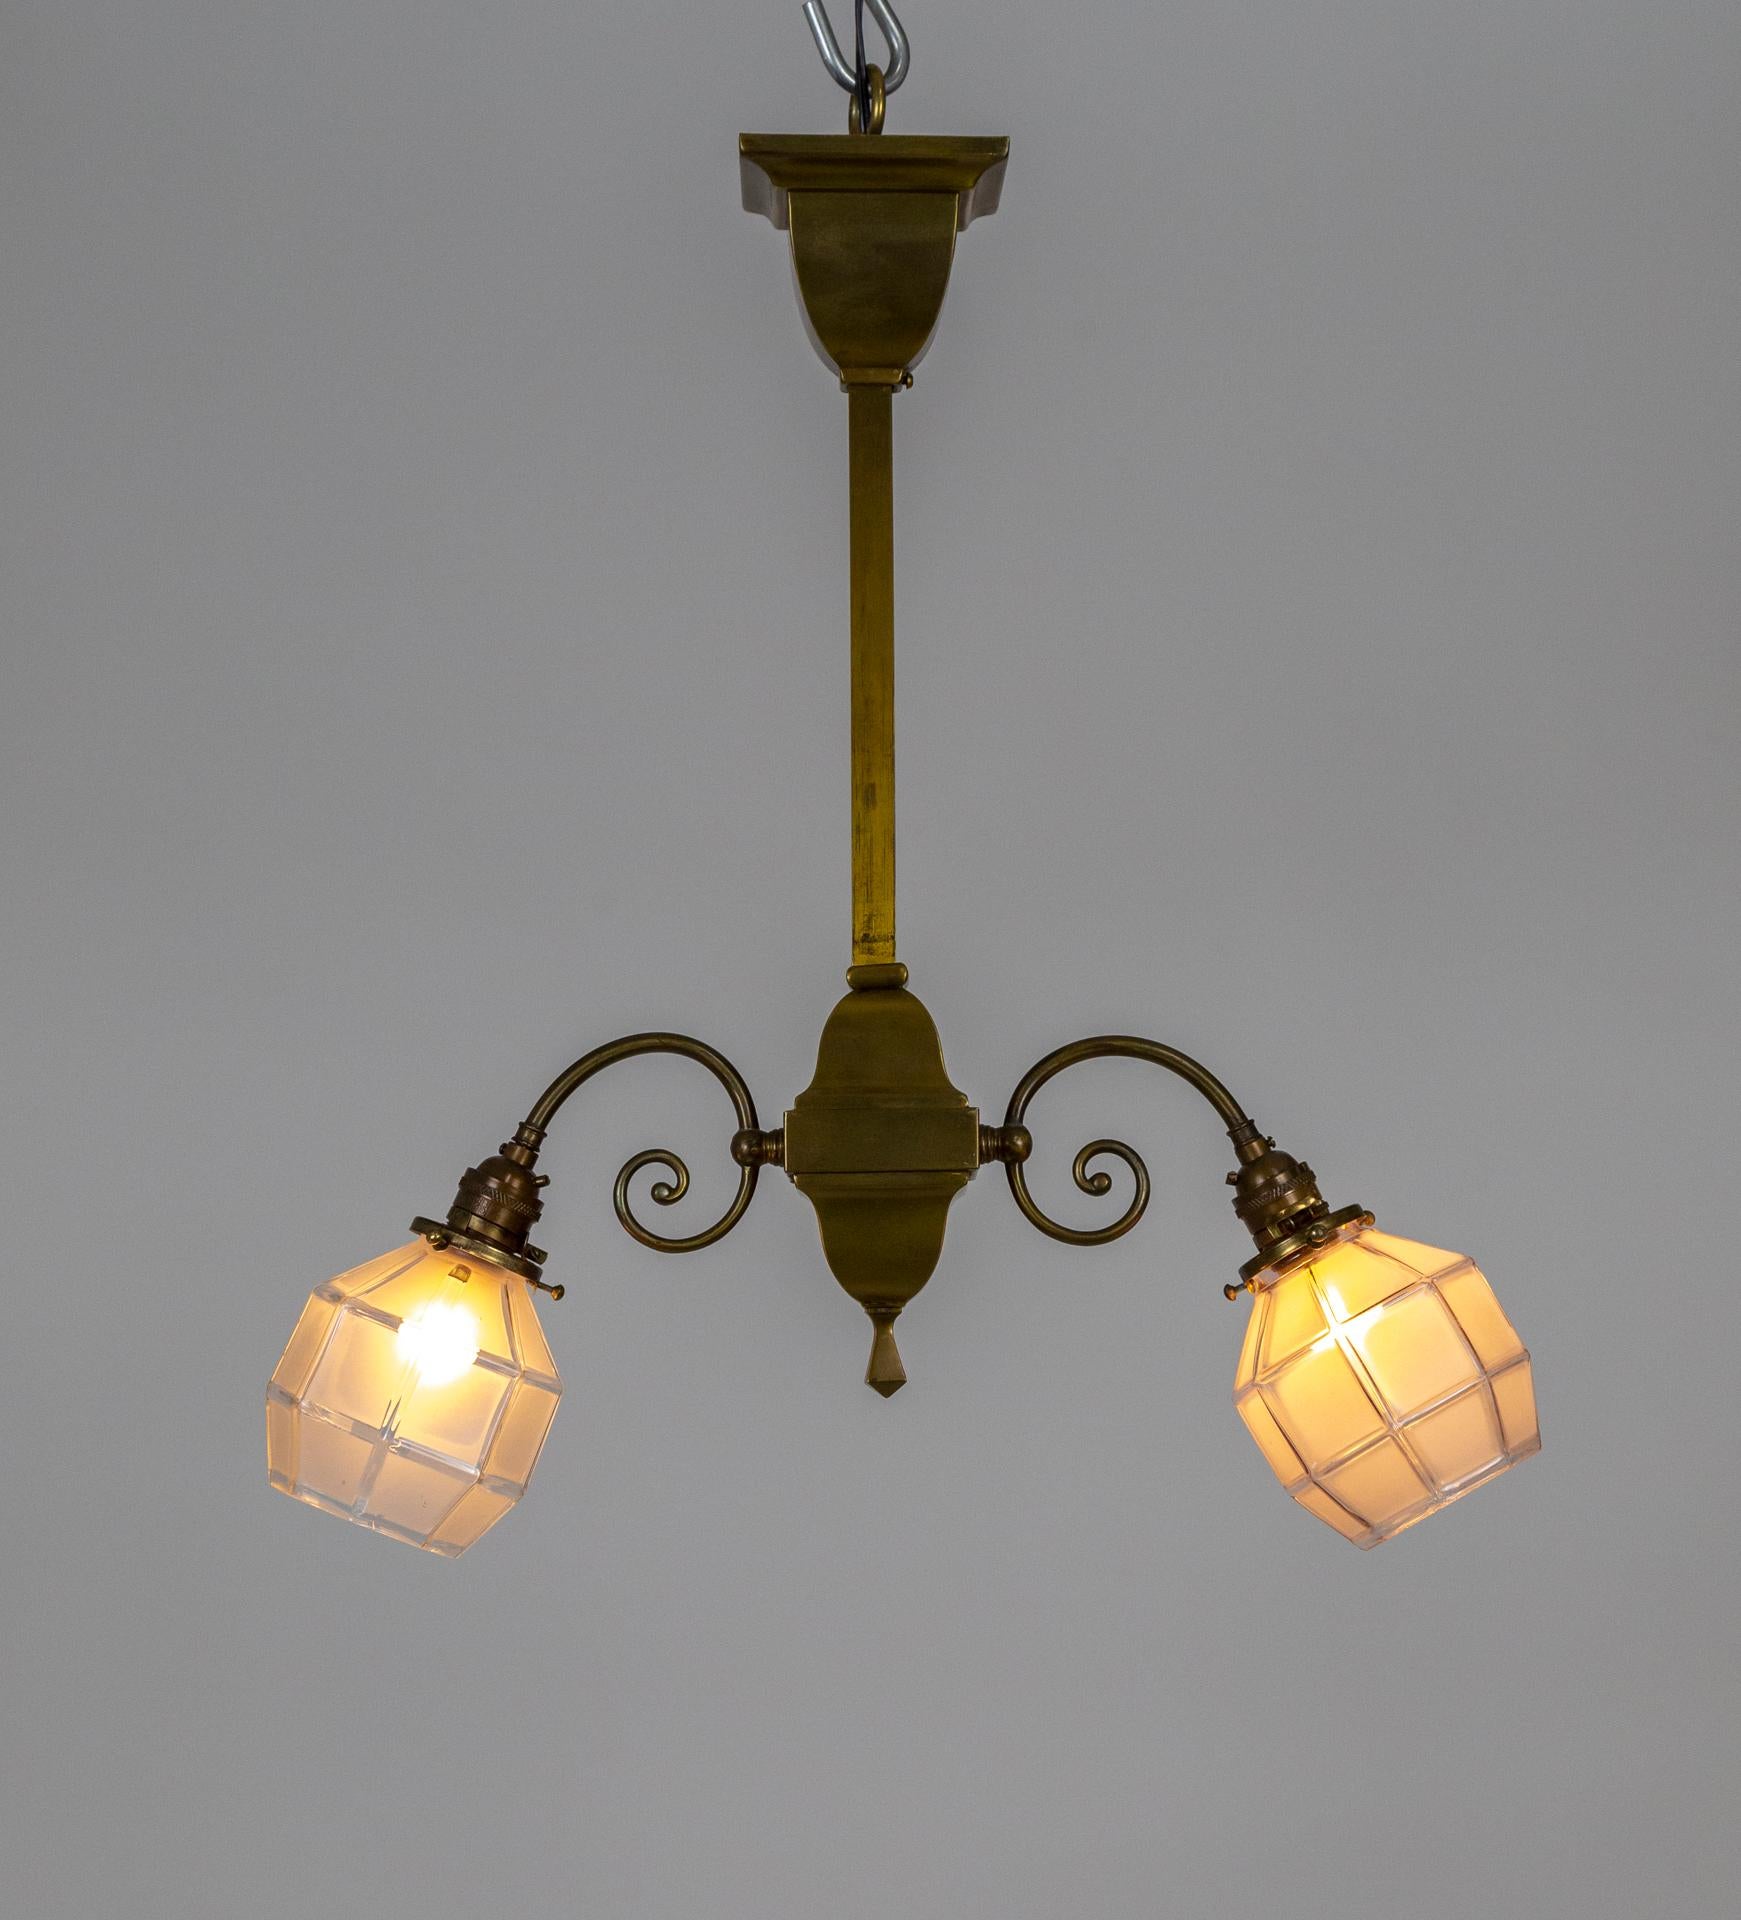 A pair of well-crafted, brass pendant lights with square tube stems and small scroll arms. Added interest comes from the shape of the paneled, frosted glass shades. Early 20th century. Each fixture has two medium bulb sockets, newly wired. 21